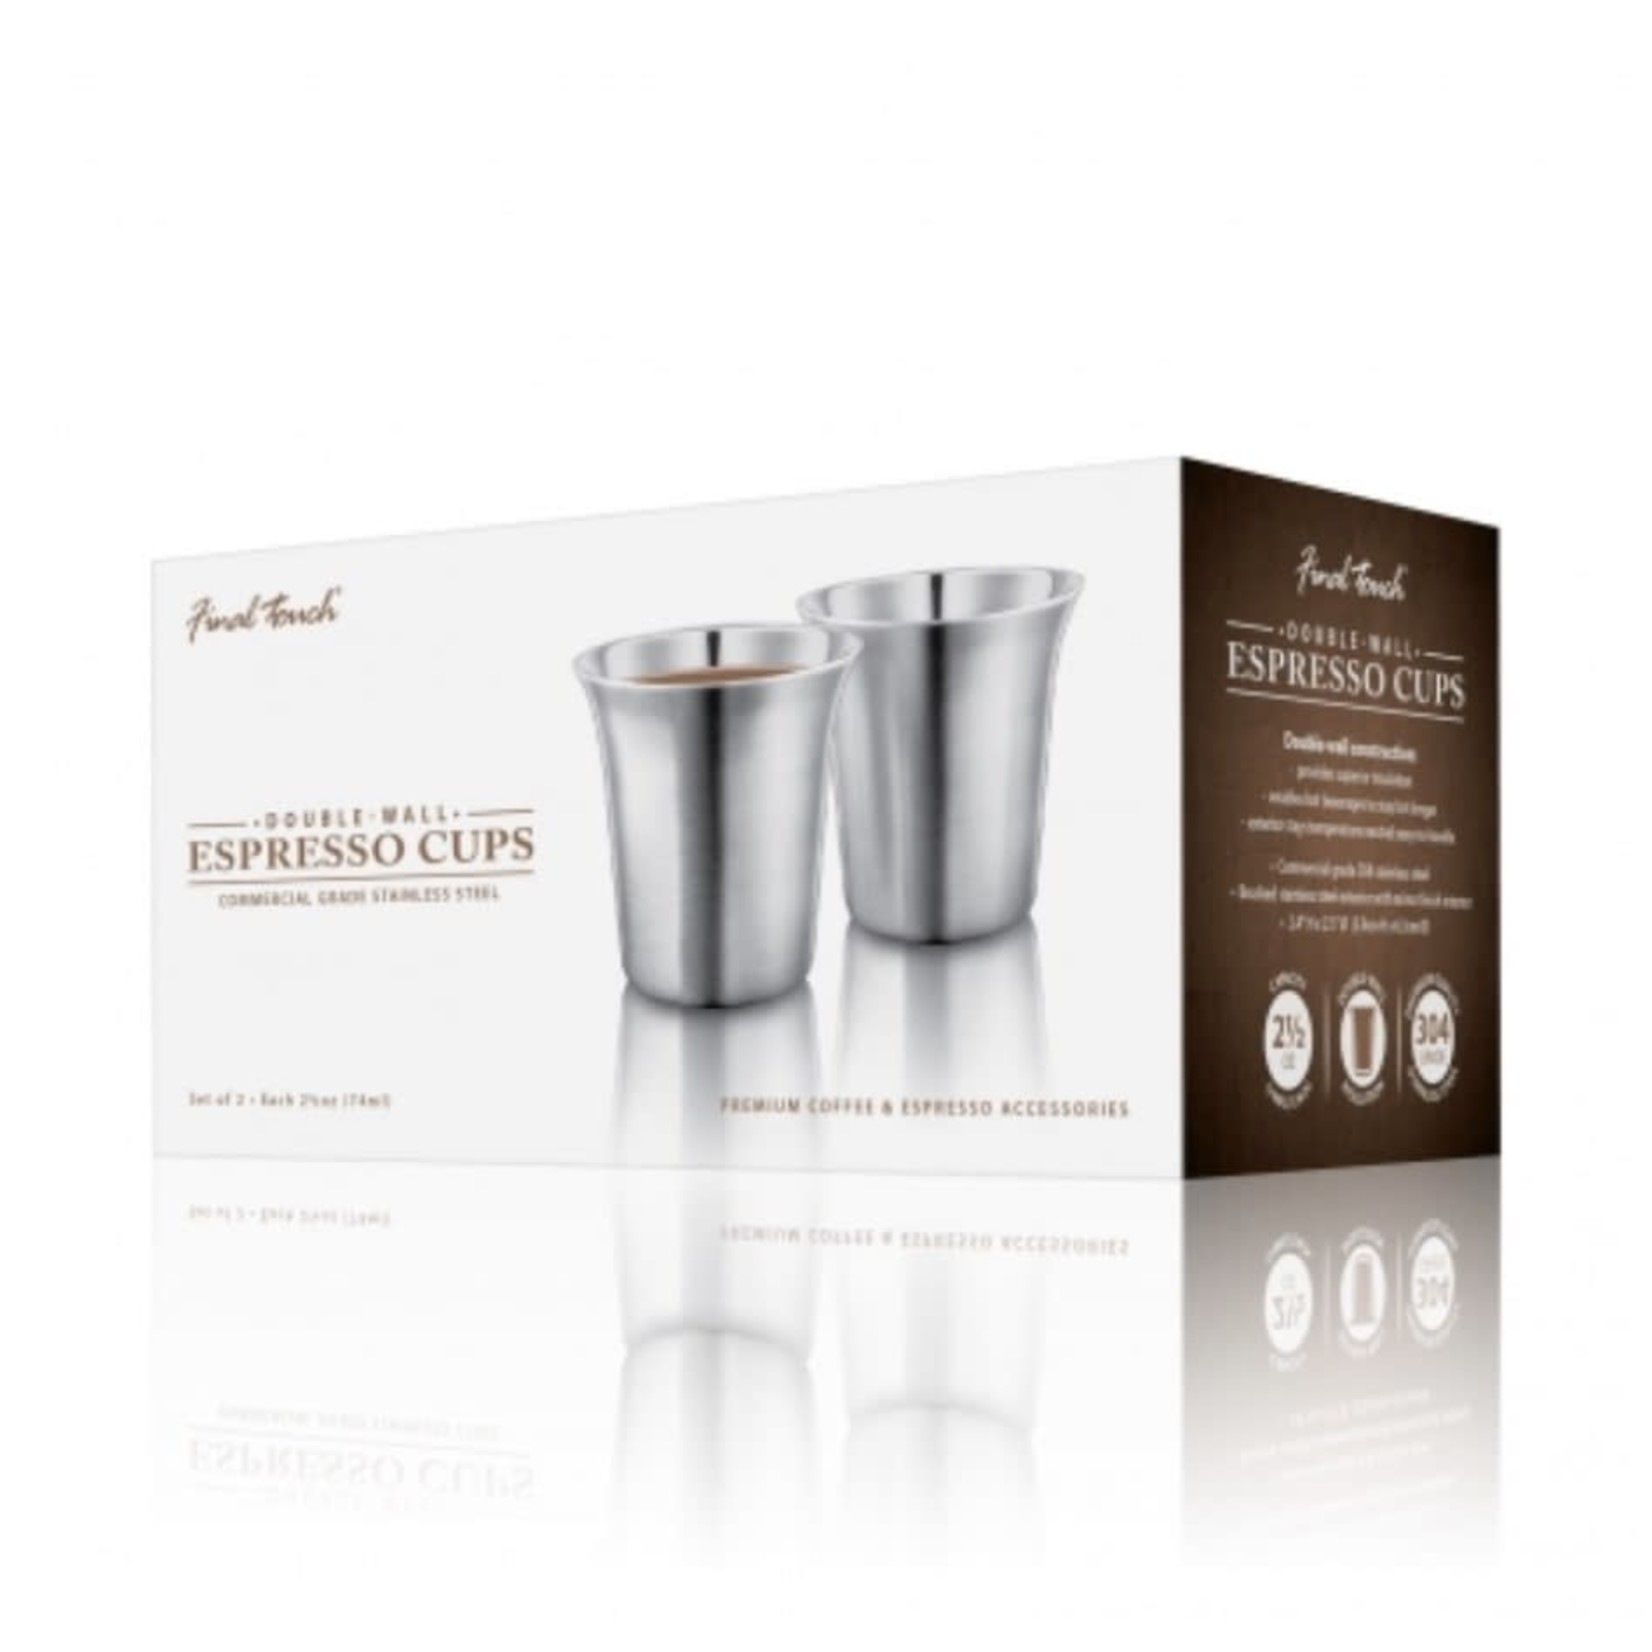 FINAL TOUCH FINAL TOUCH Double-Wall Espresso Cups 2.5oz S/2 - Stainless